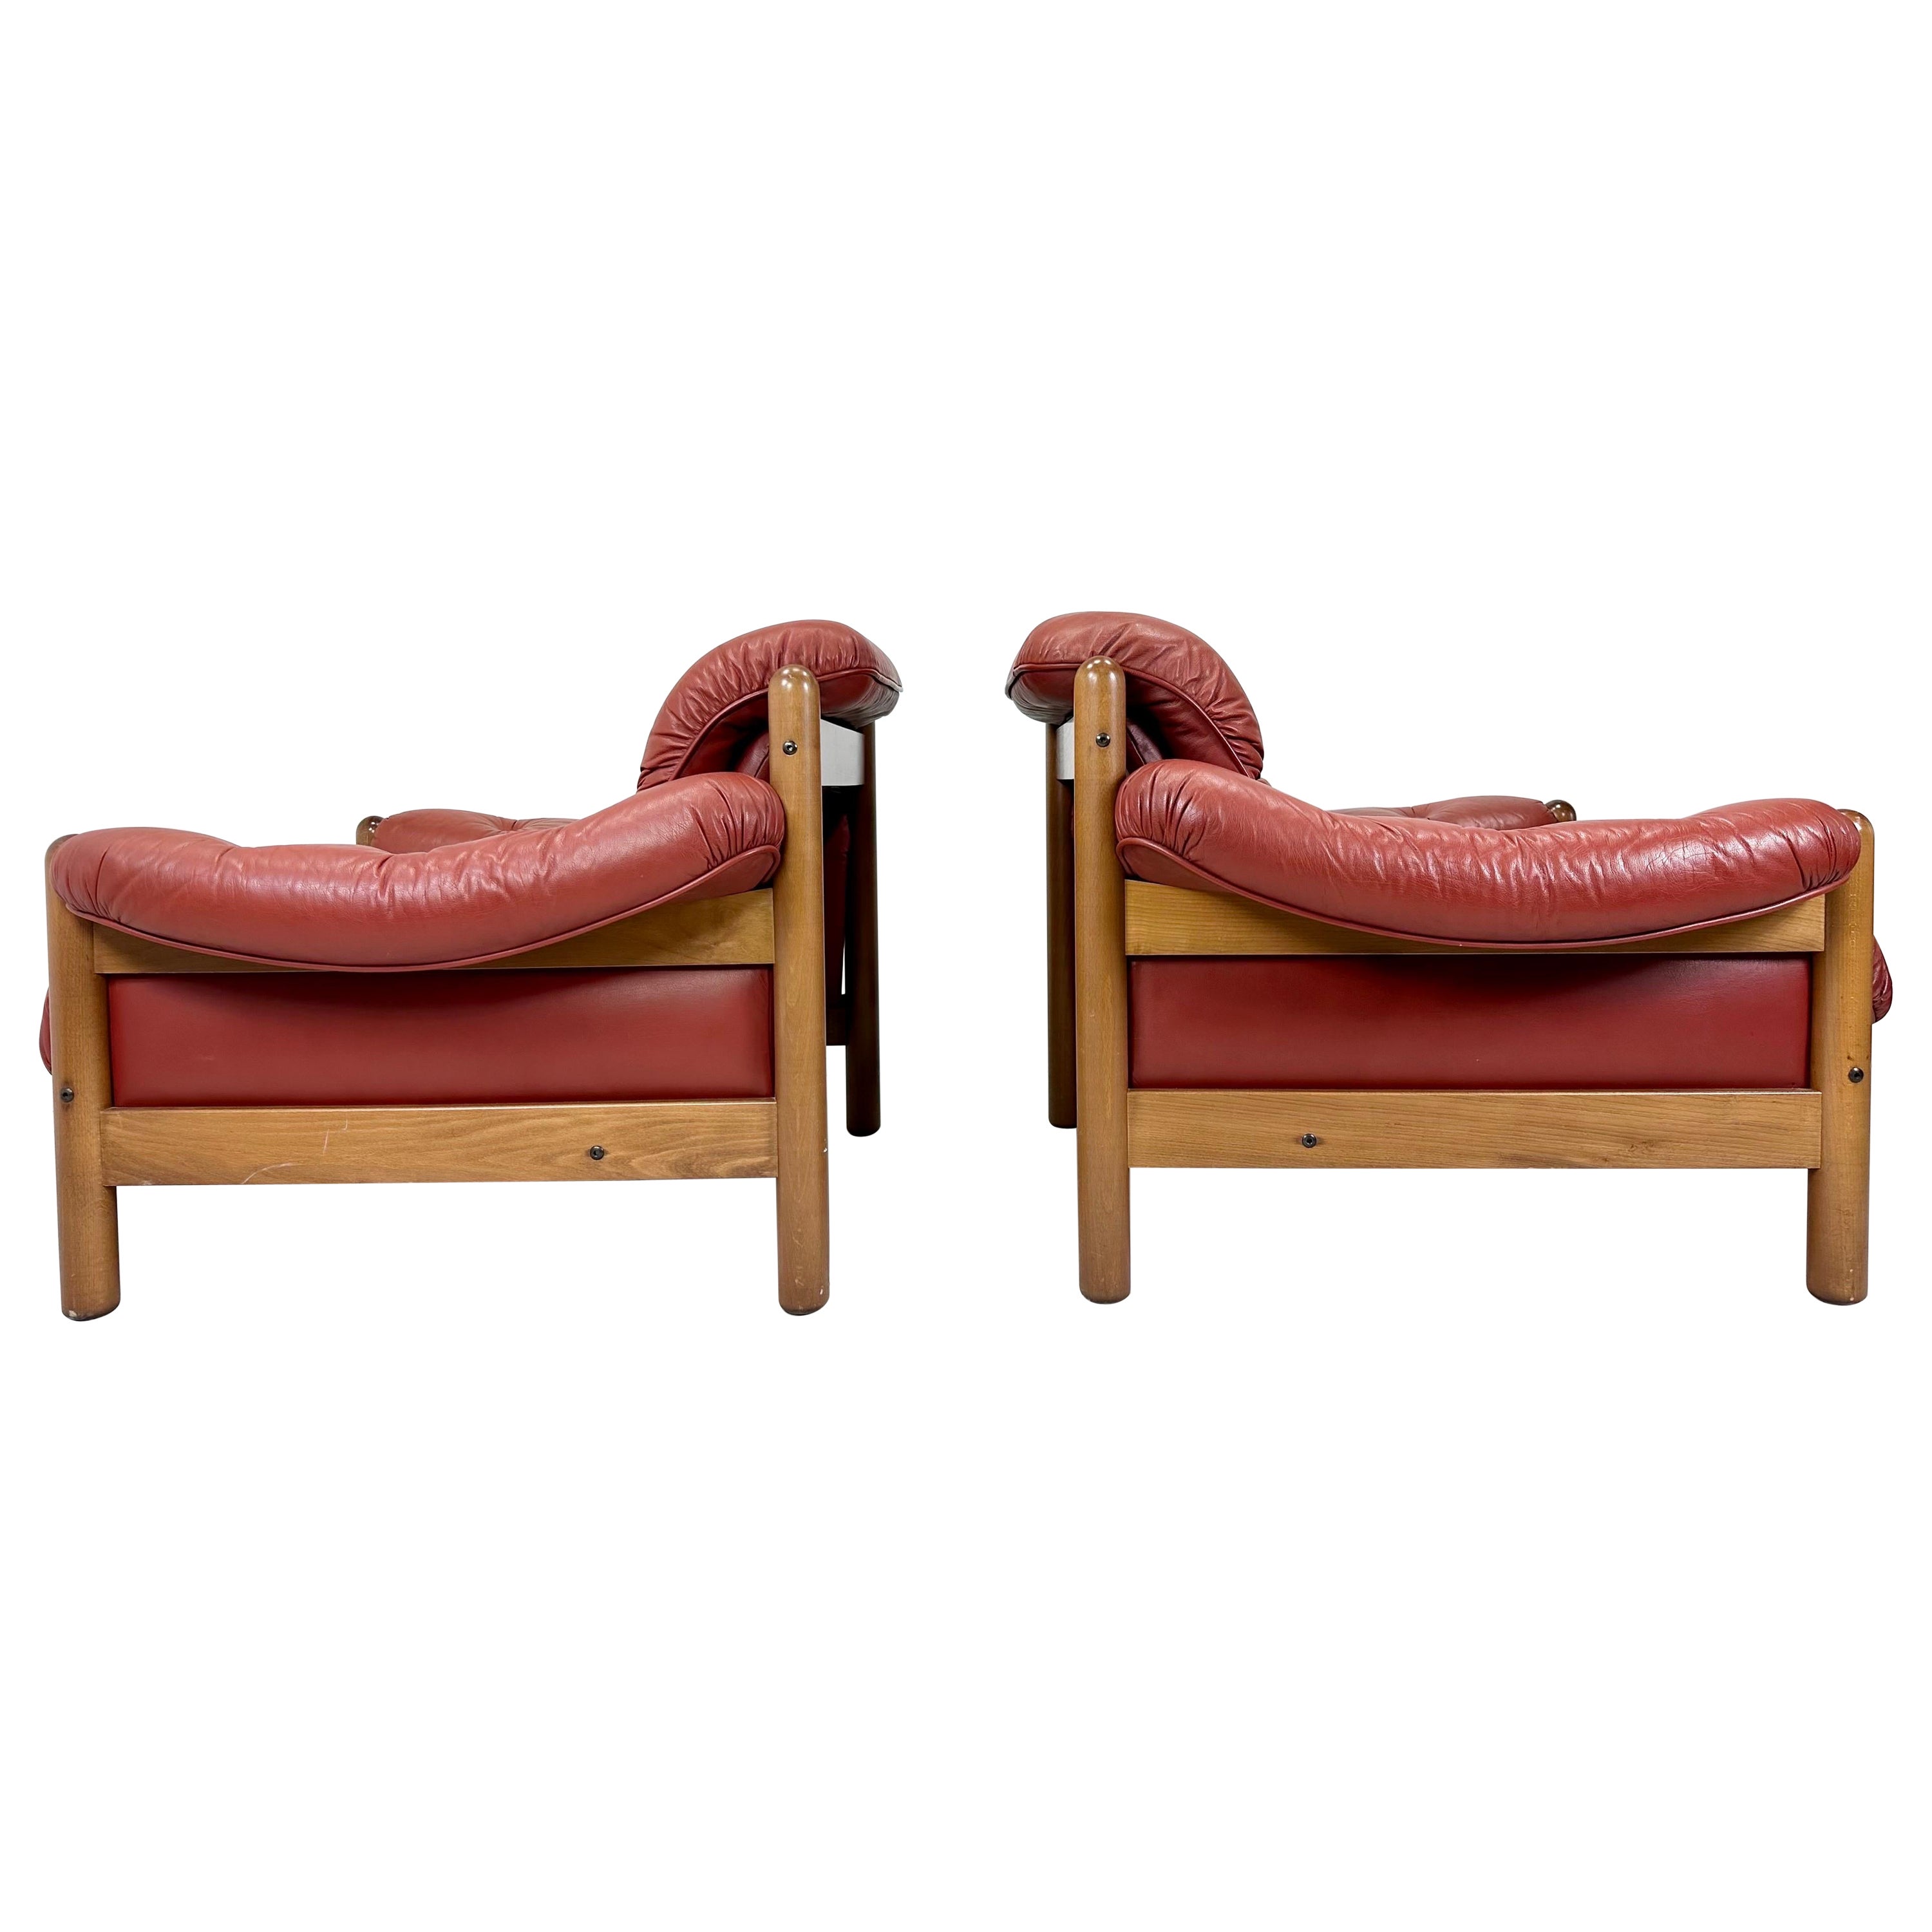 Pair of 1970’s Swedish Leather Lounge Chairs